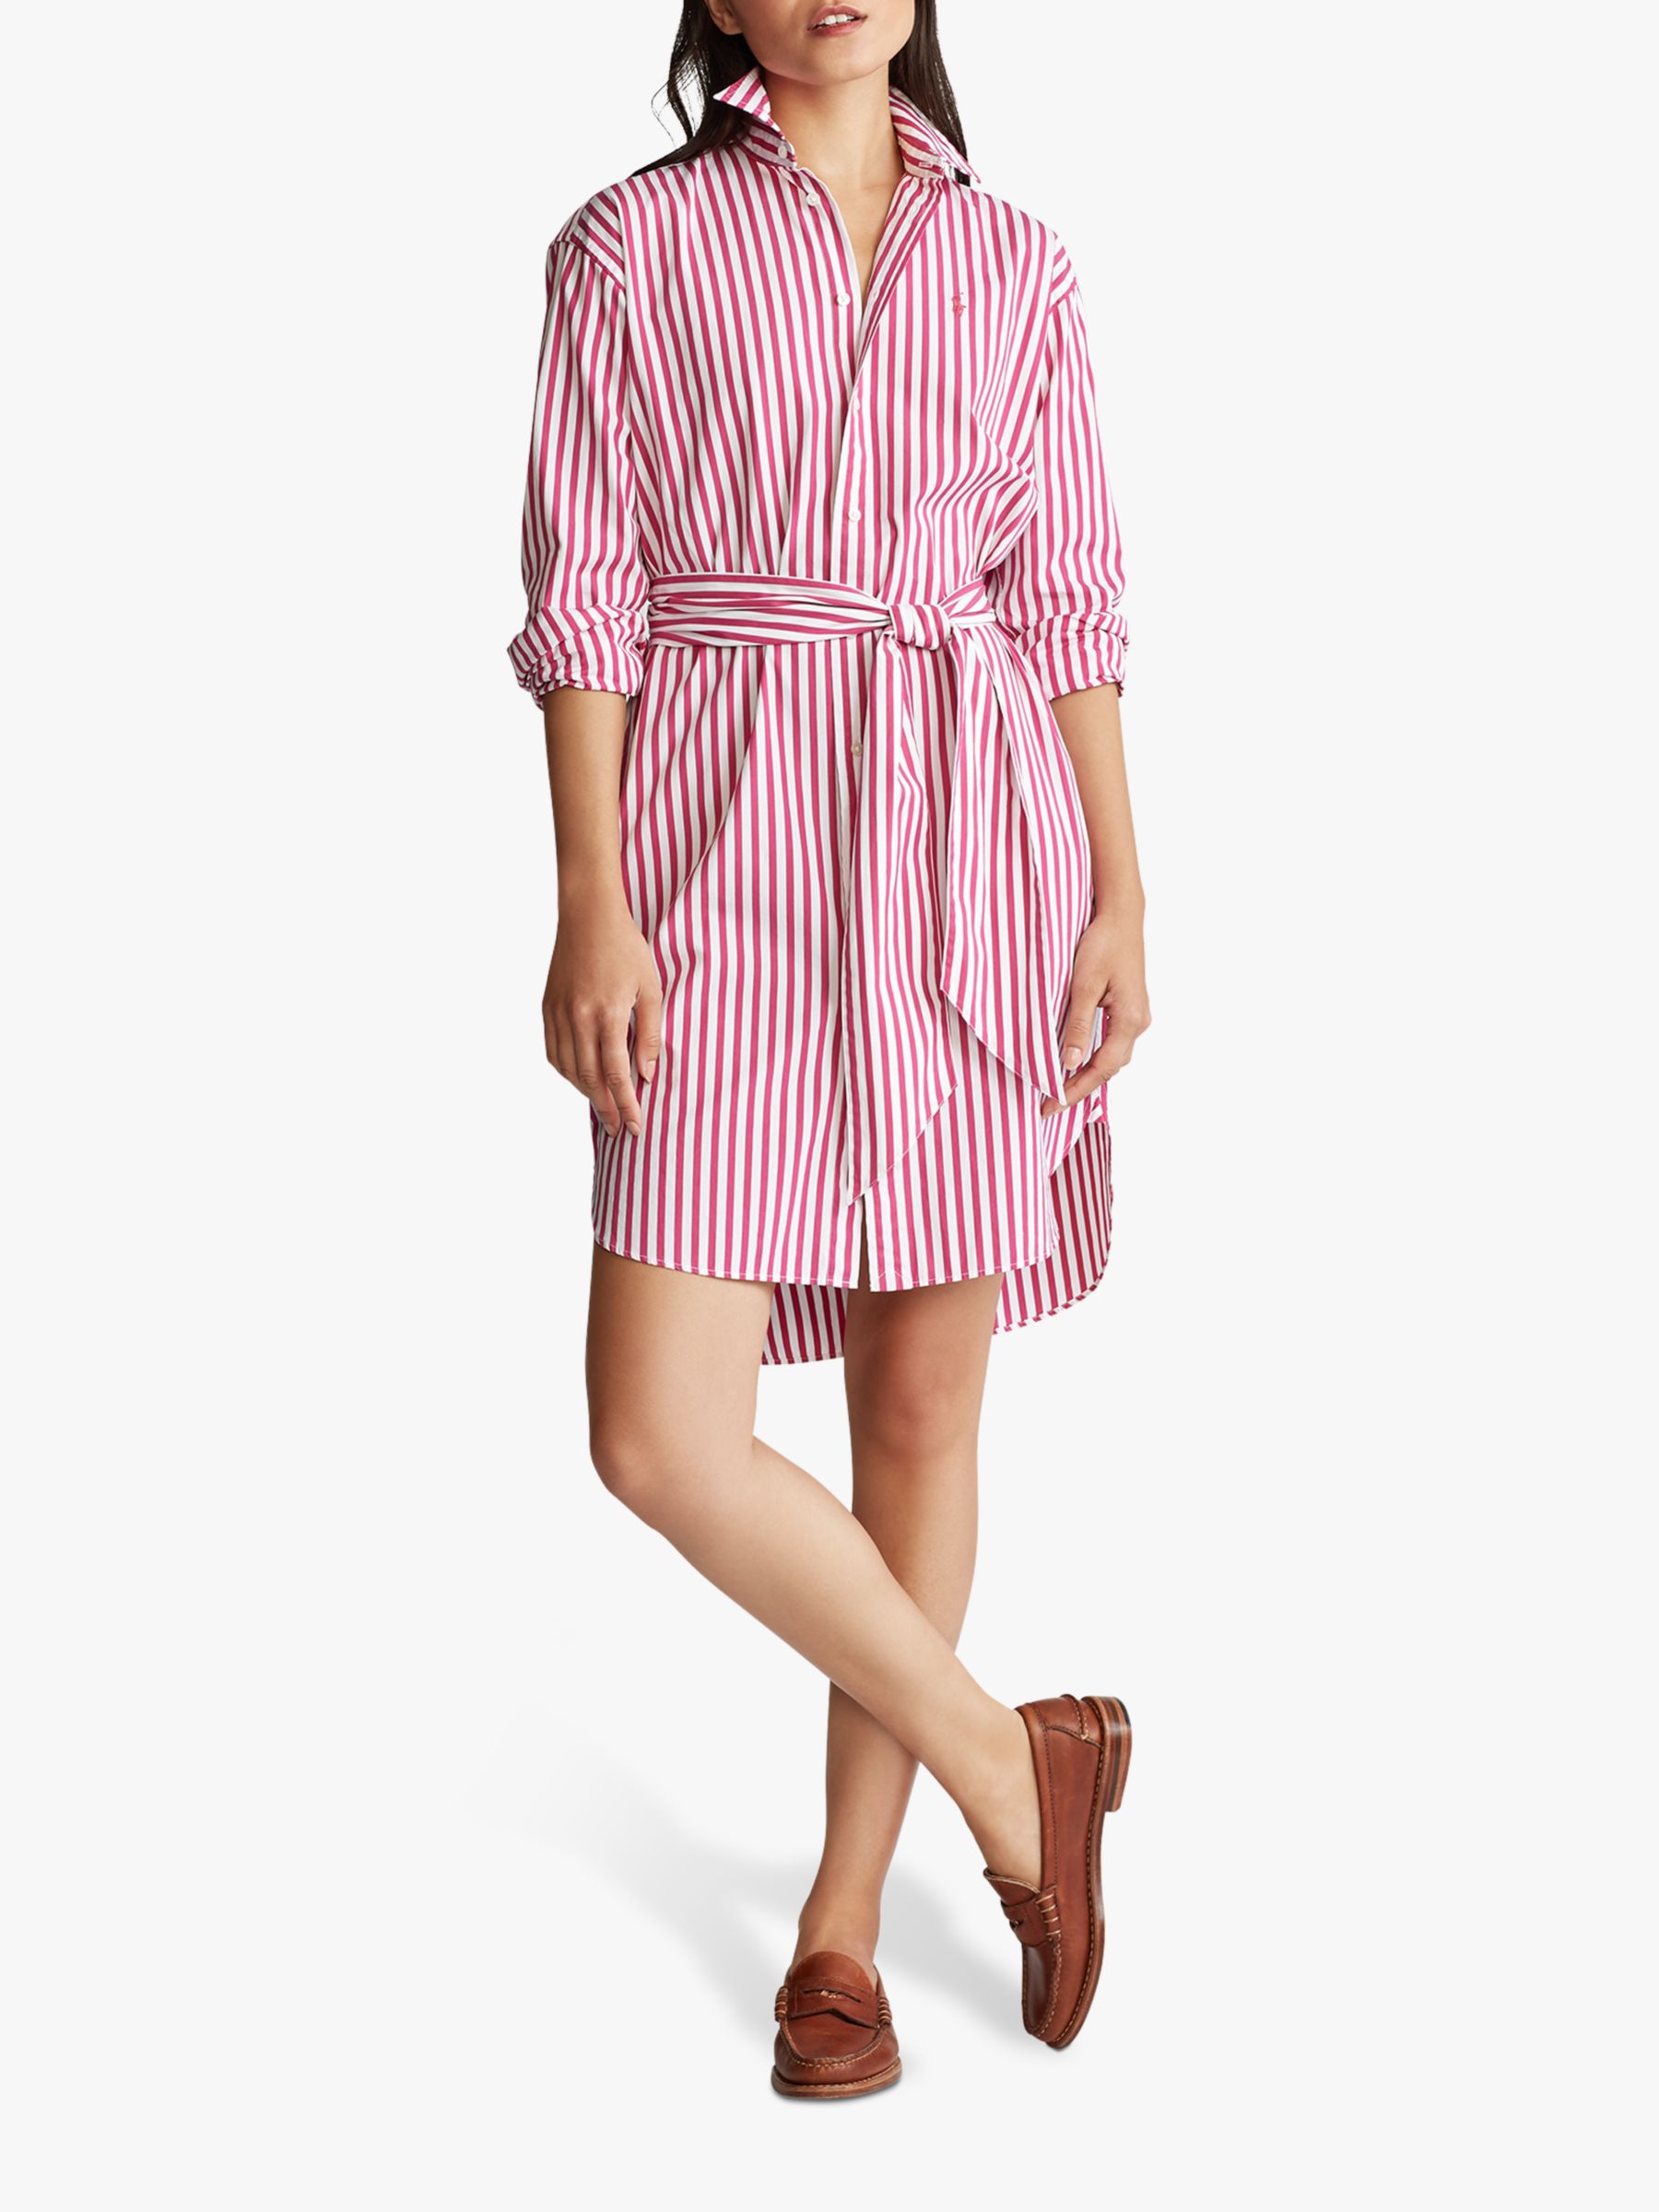 ralph lauren pink and white striped dress